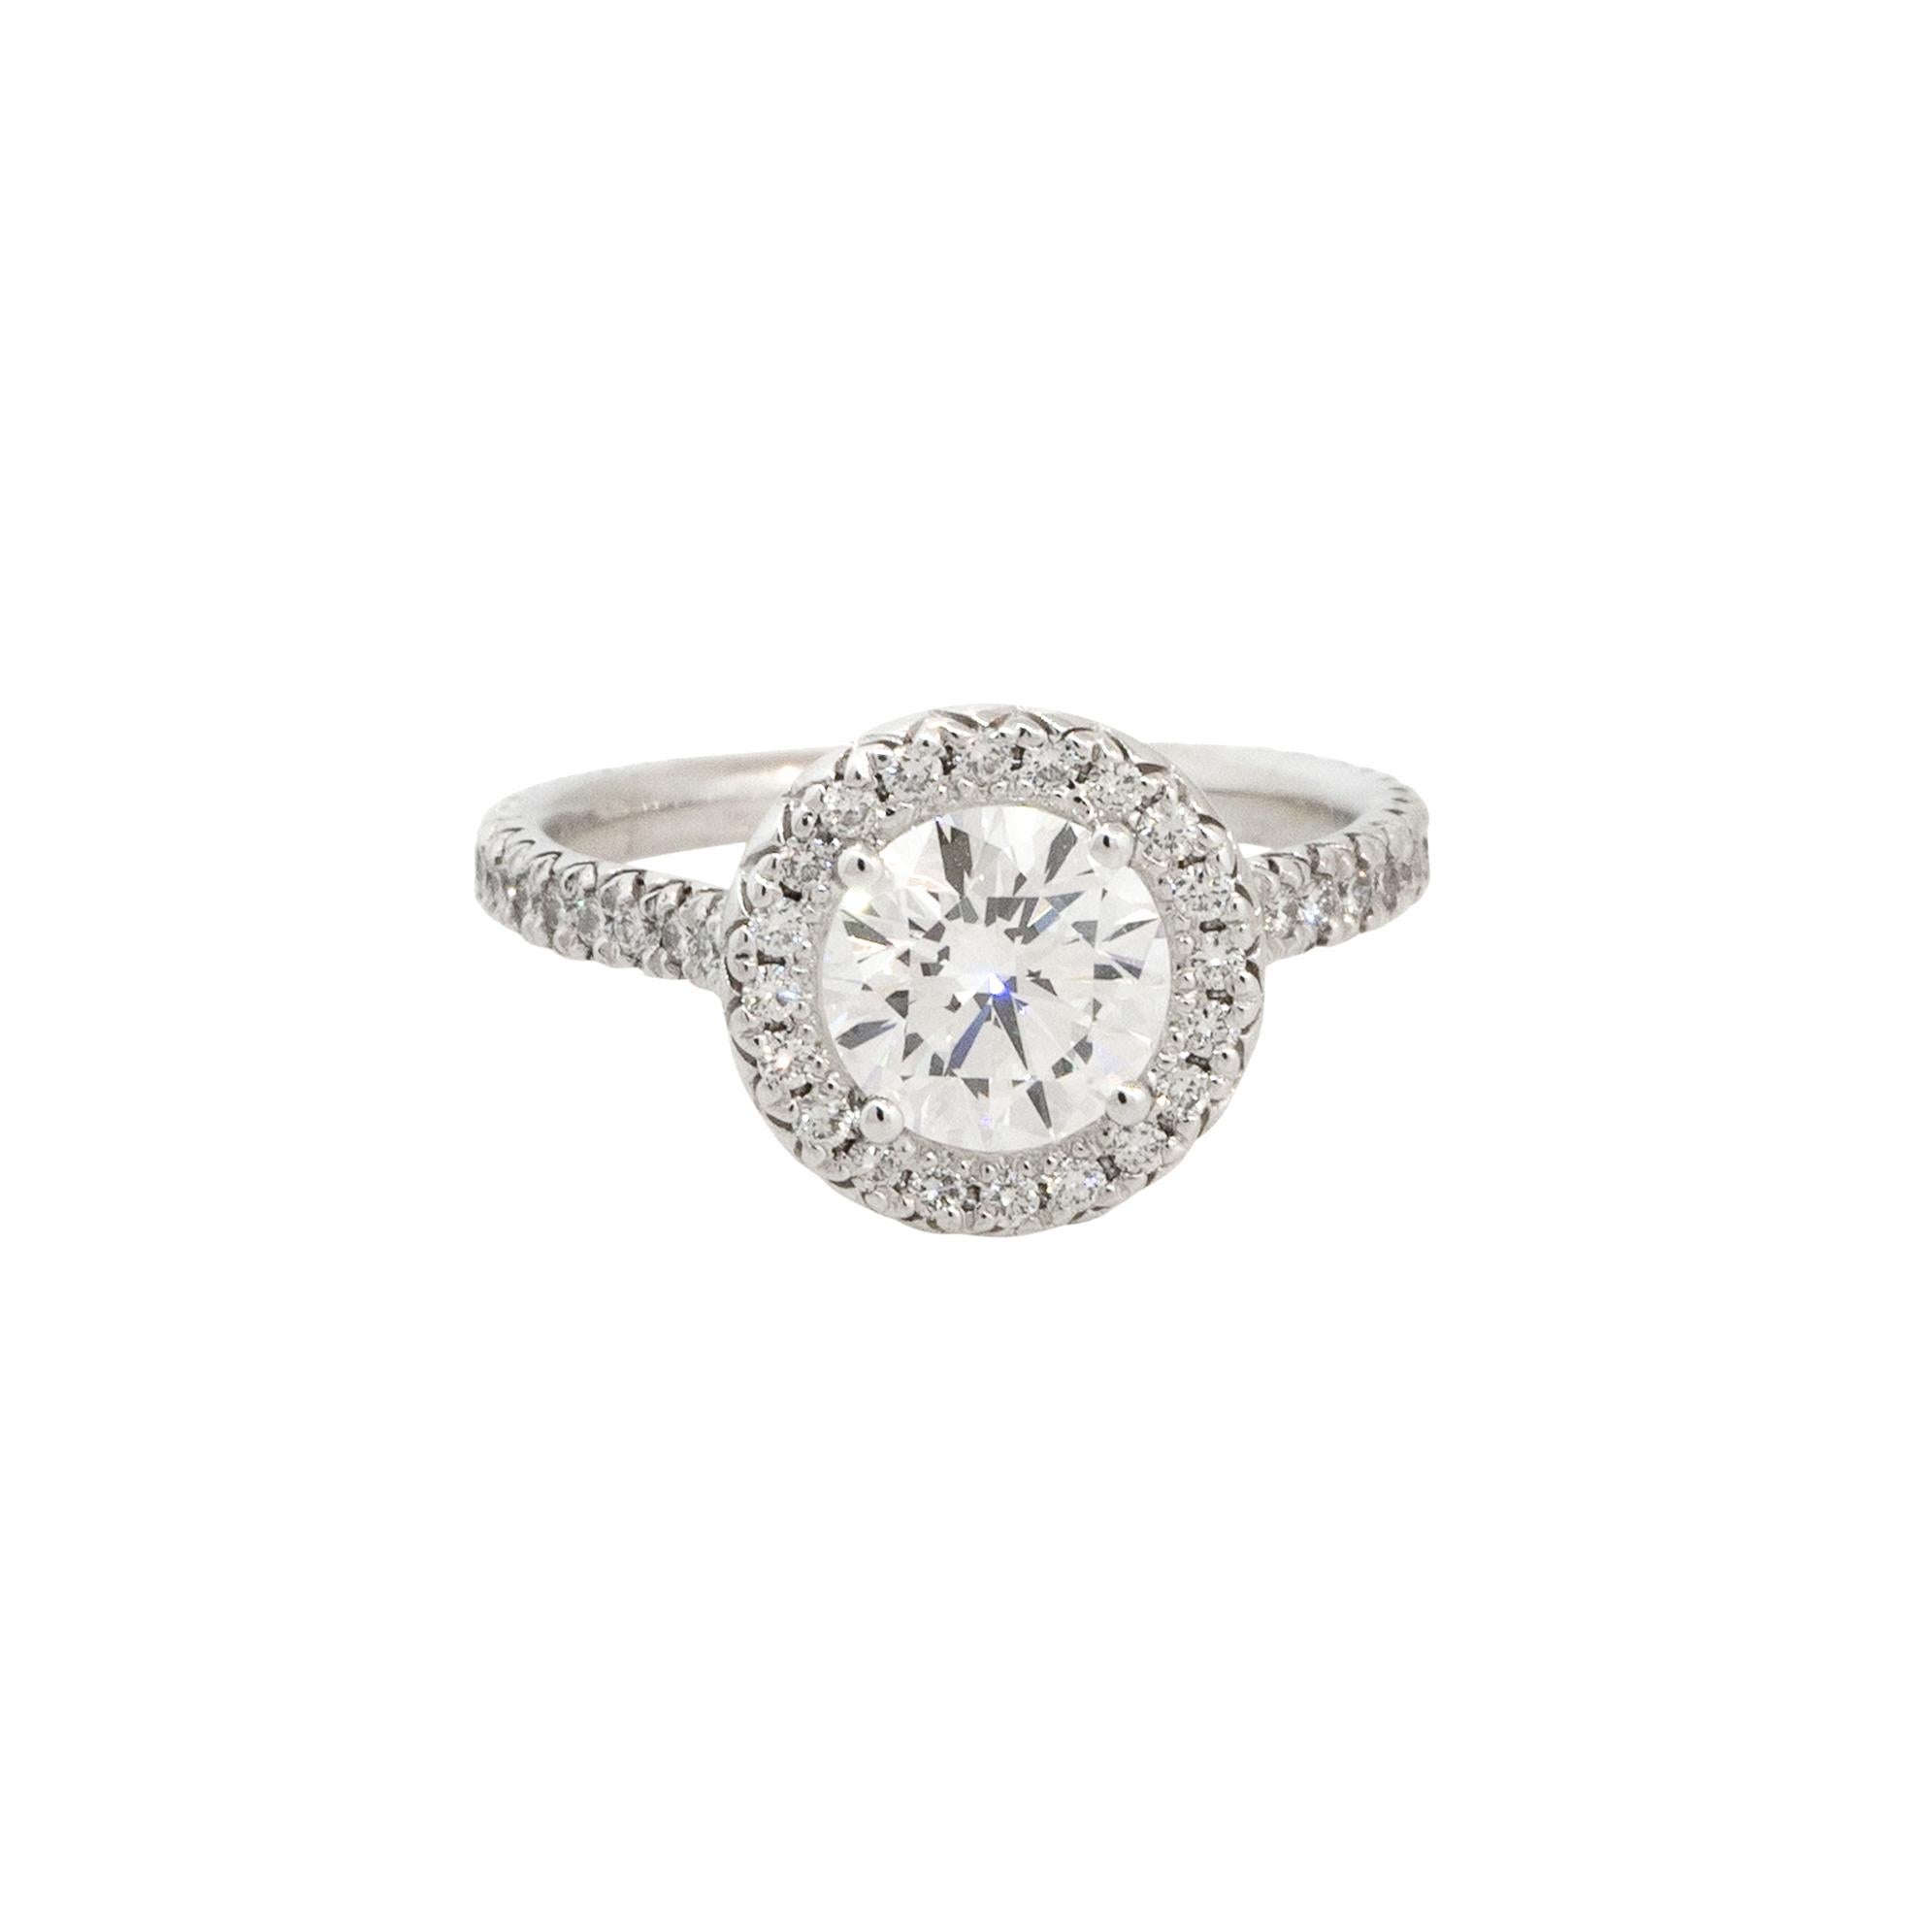 GIA Certified 18k White Gold 1.47ctw Round Brilliant Diamond Halo Engagement Ring
Style: 18k White Gold GIA 1.07ct Round Brilliant Halo Set Engagement Ring
Main Diamond: 1.07ctw of Round Brilliant Diamonds 
GIA Cert #: 2106152090
Diamond Color: F in